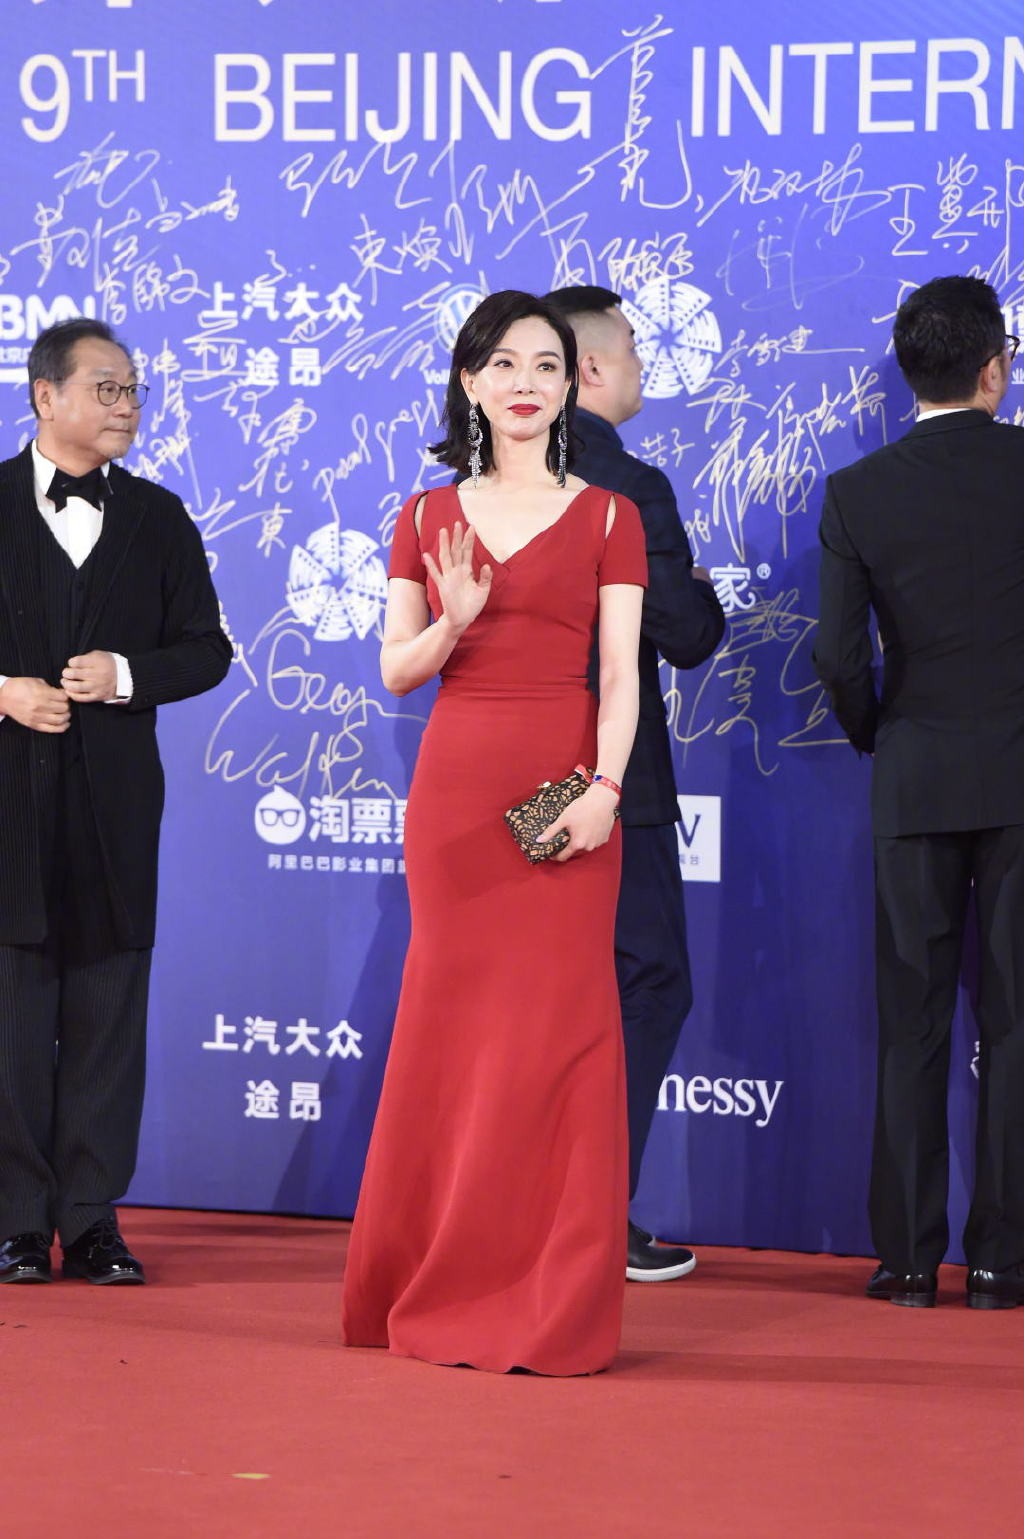 Red carpet of the Beijing Film Festival: triple heat occupies the focus on the perfect body, slightly eliminating Angela Baby and Wu Ciao Voice - Photo 34.